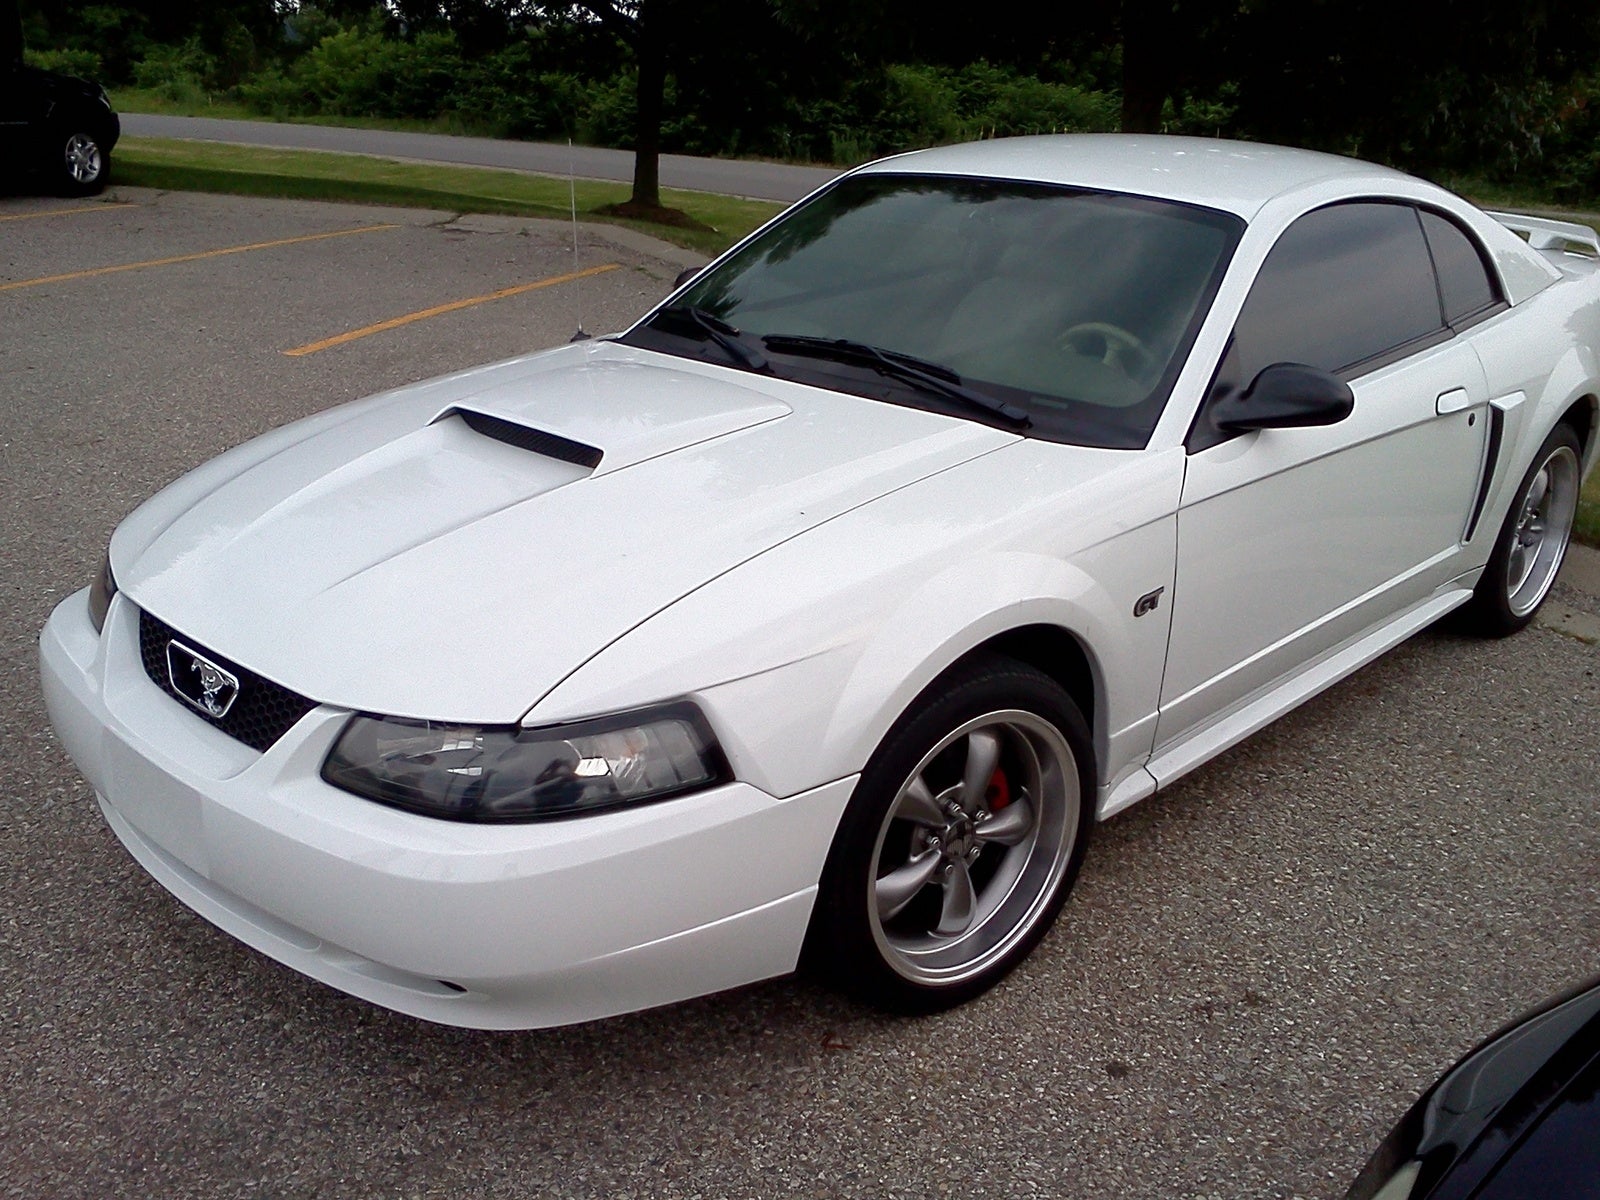 2003 Ford gt mustang specs #6